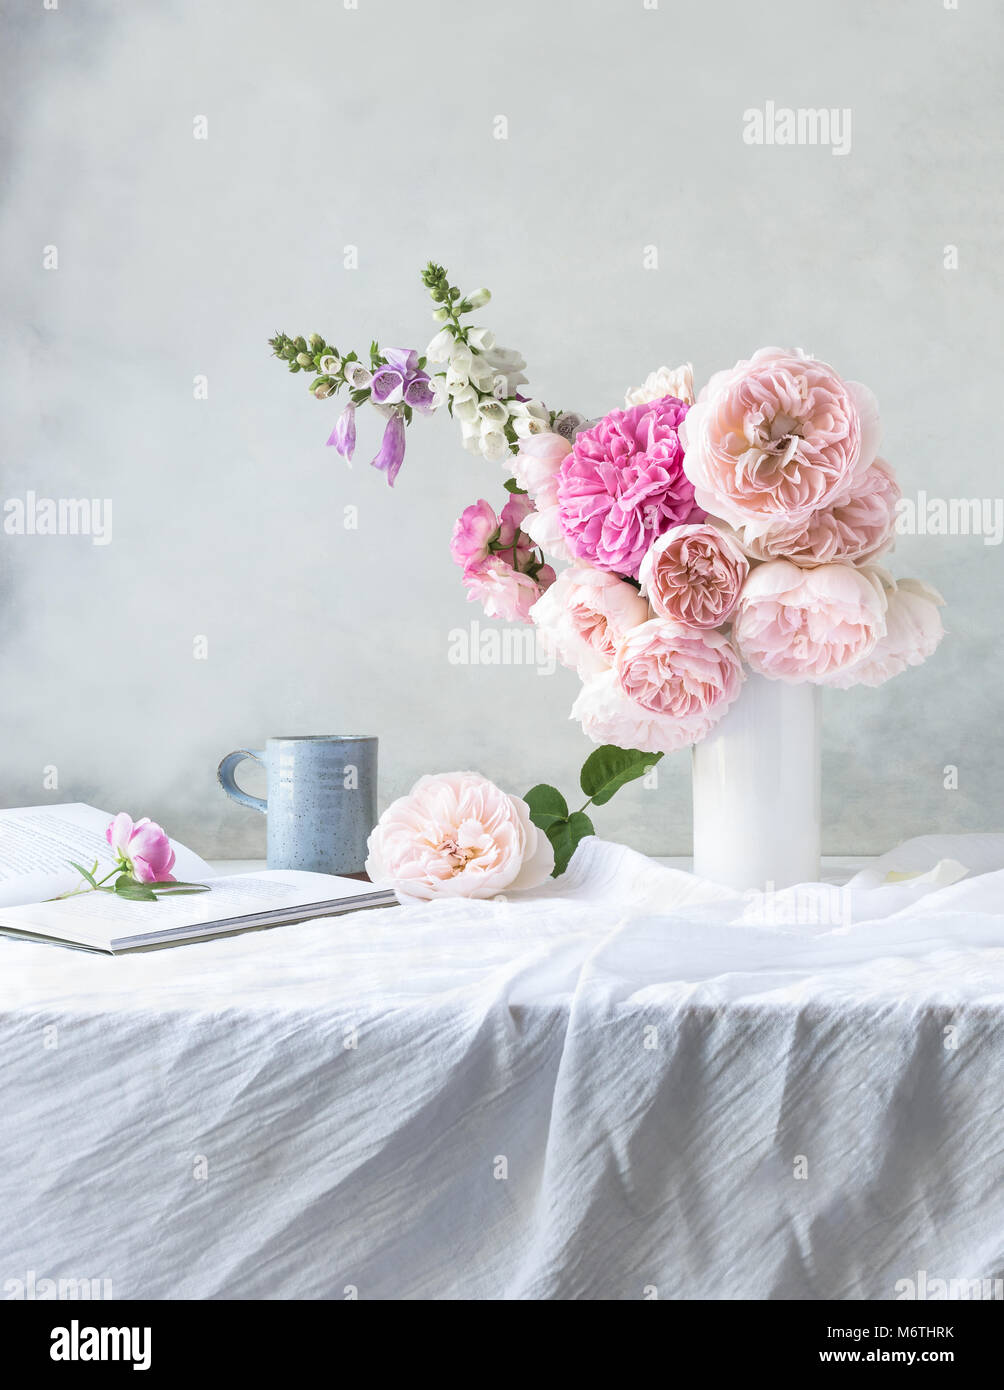 Still life, indoor, front view of table covered with pale grey linen, with white vase of pink David Austin roses & foxgloves, pale blue mug, open book Stock Photo